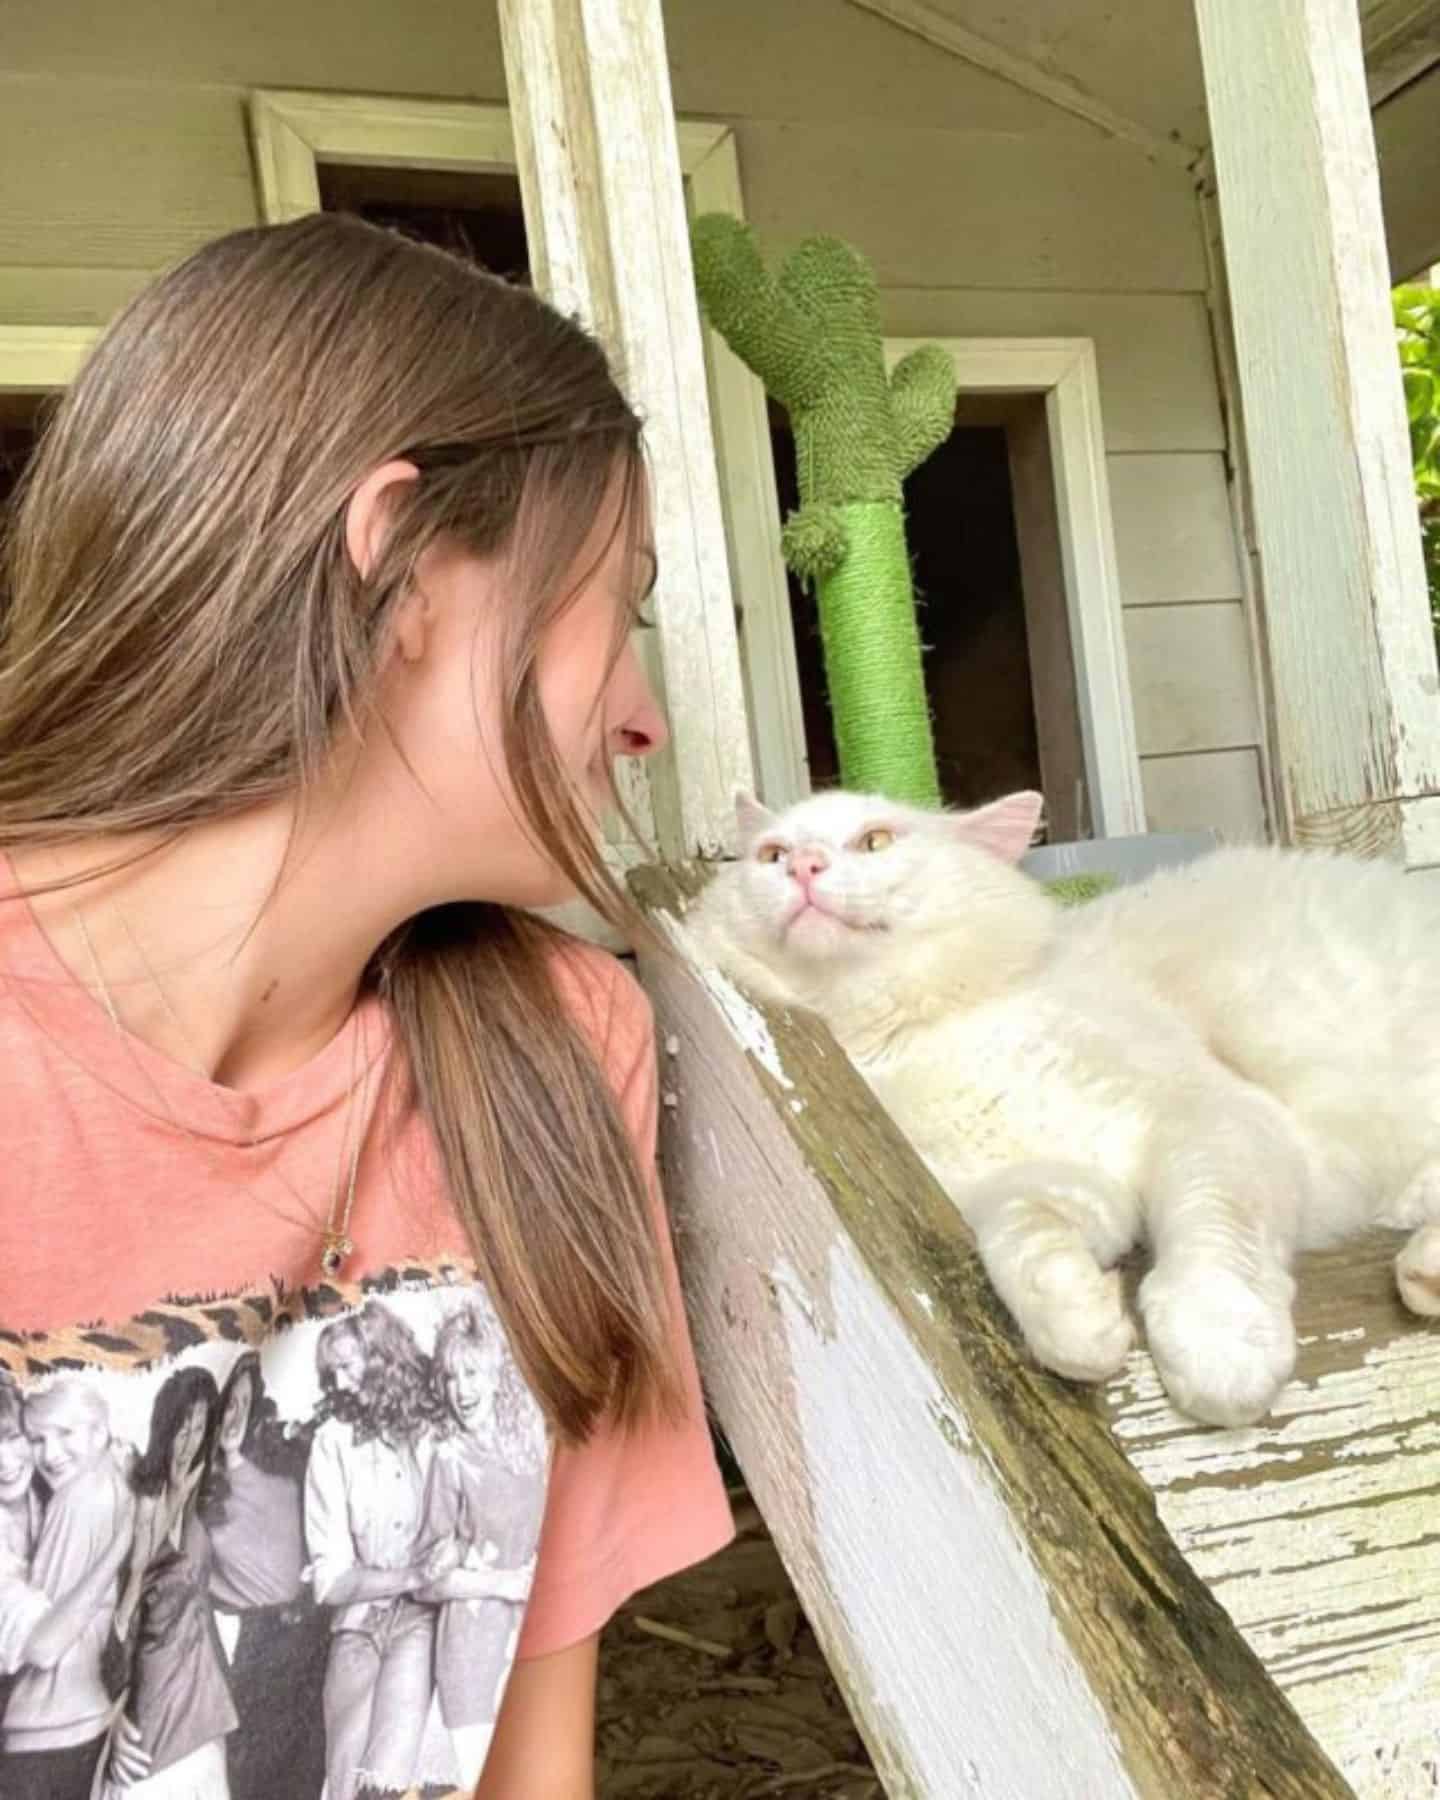 the girl and the cat look at each other with love